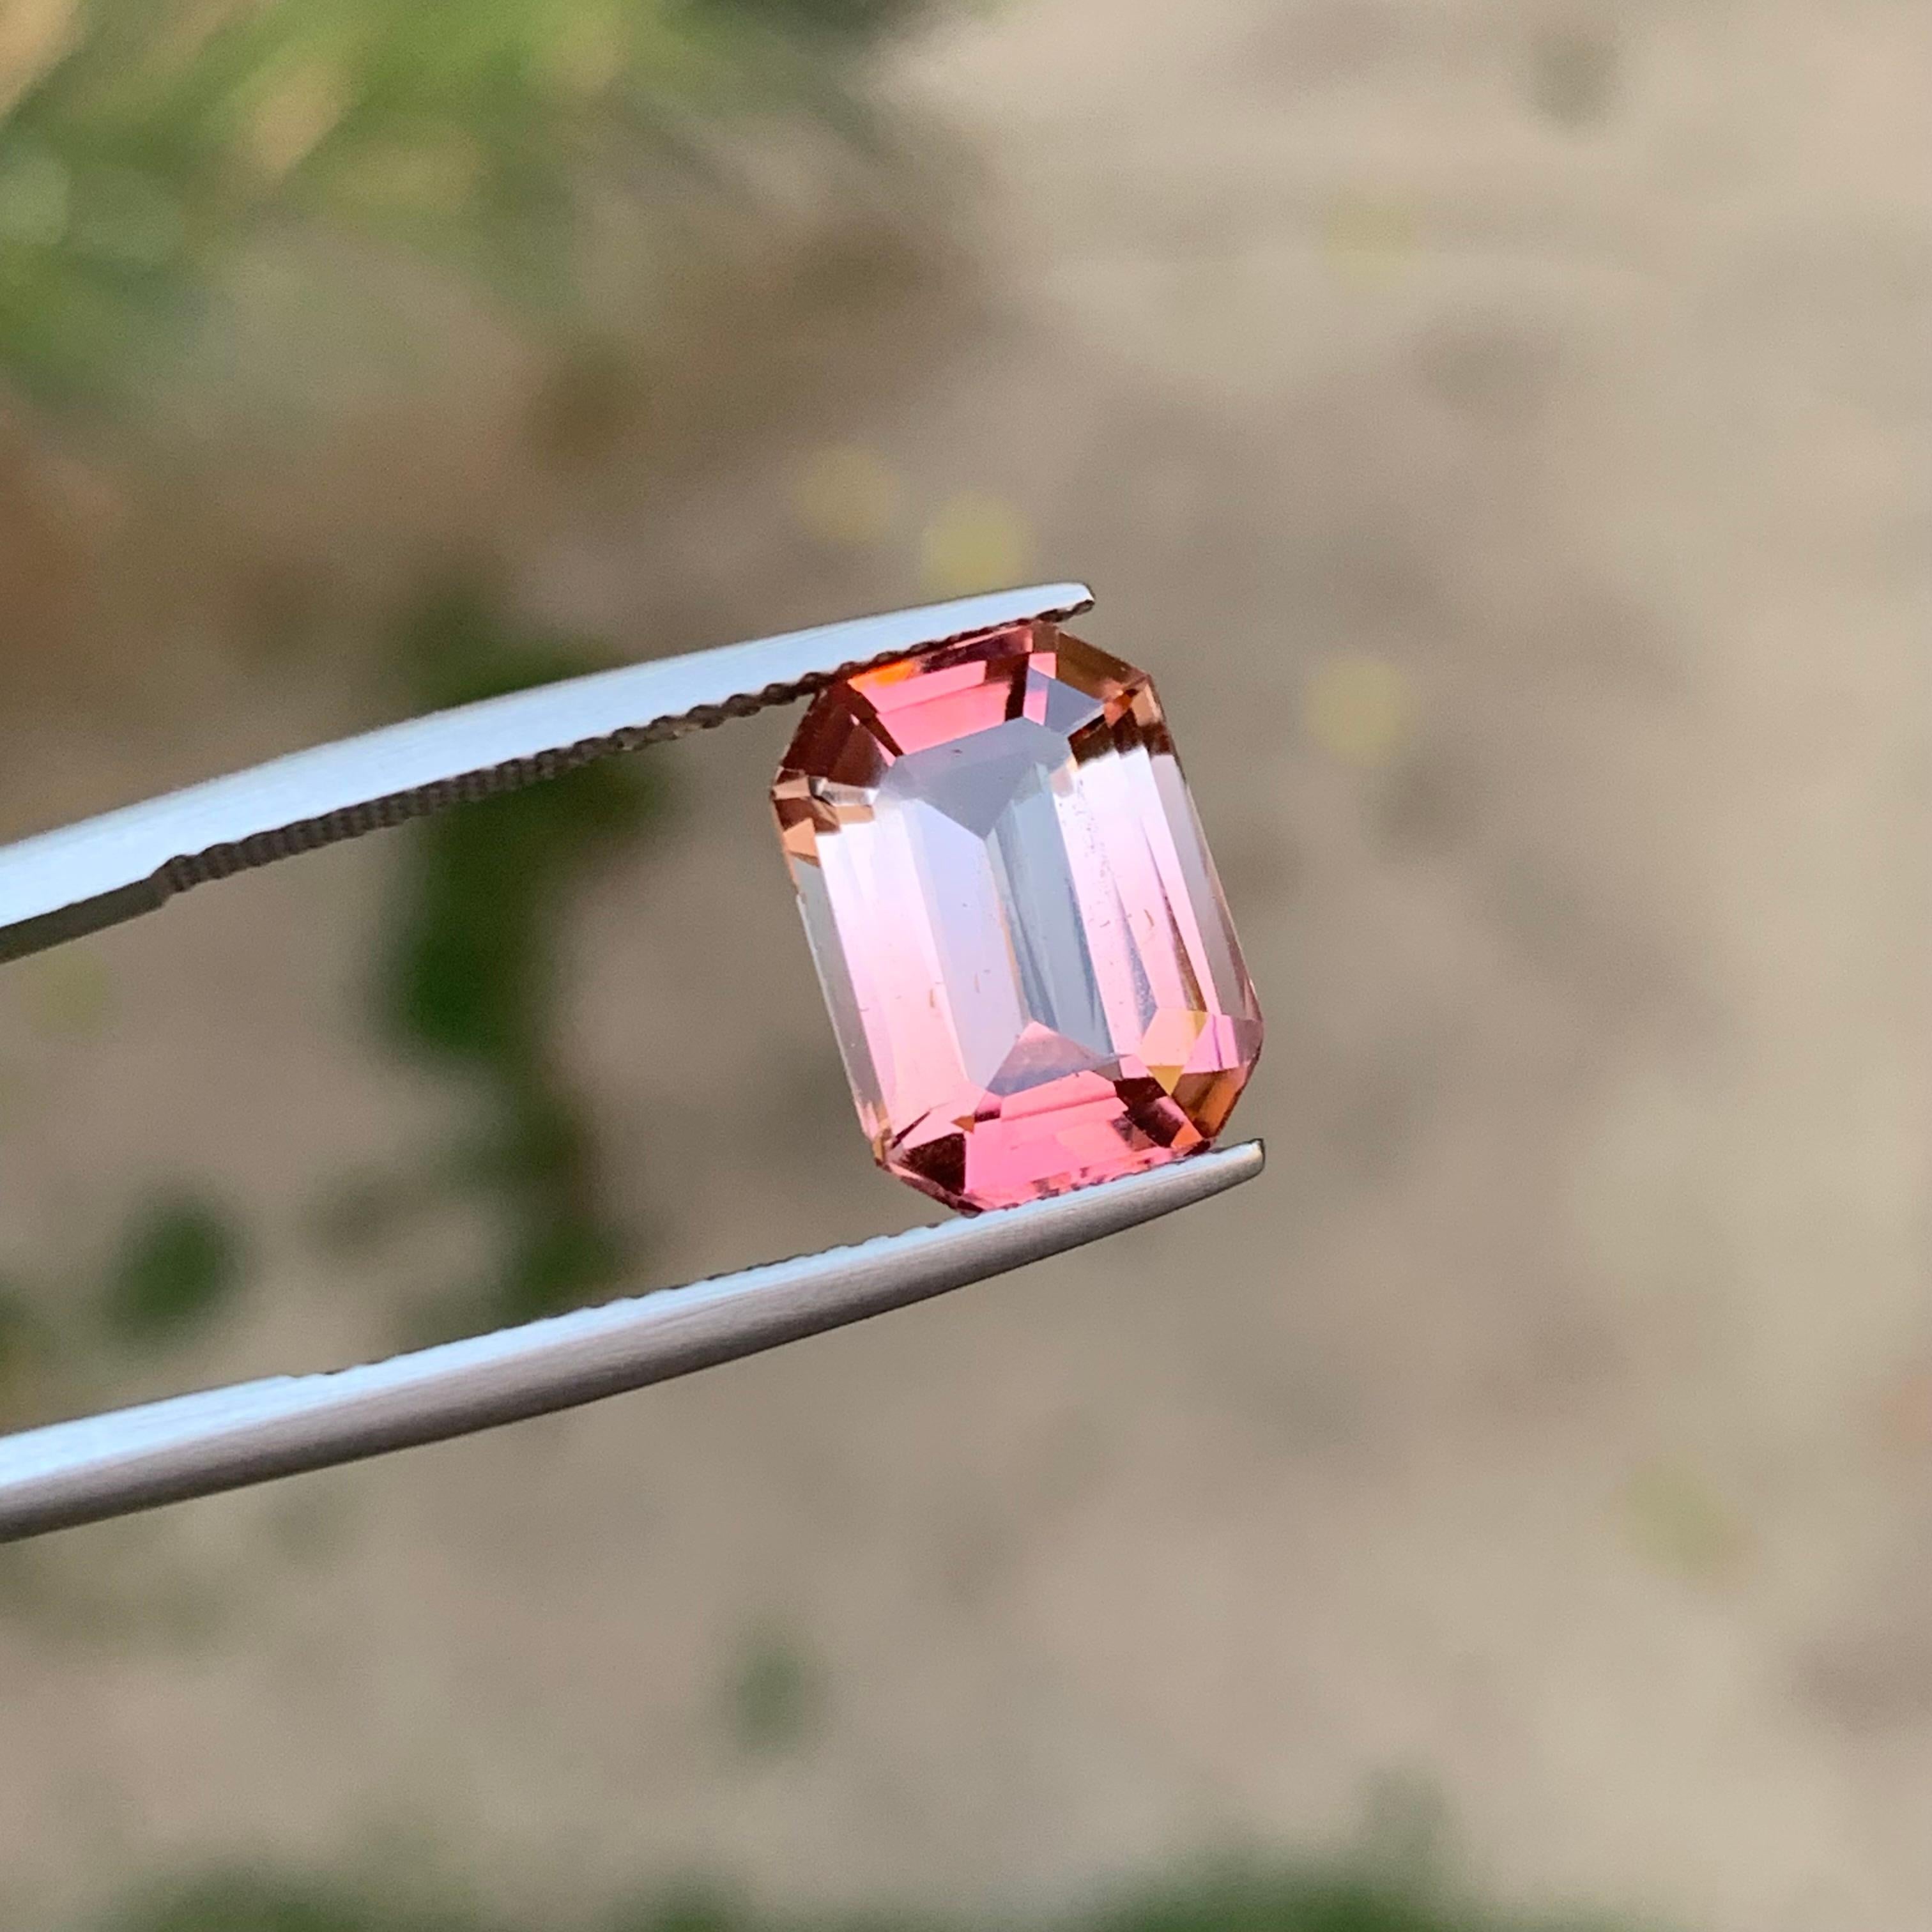 Rare Peachy Pink Bicolor Natural Tourmaline Gemstone, 4.80 Ct Emerald Cut-Ring  For Sale 3